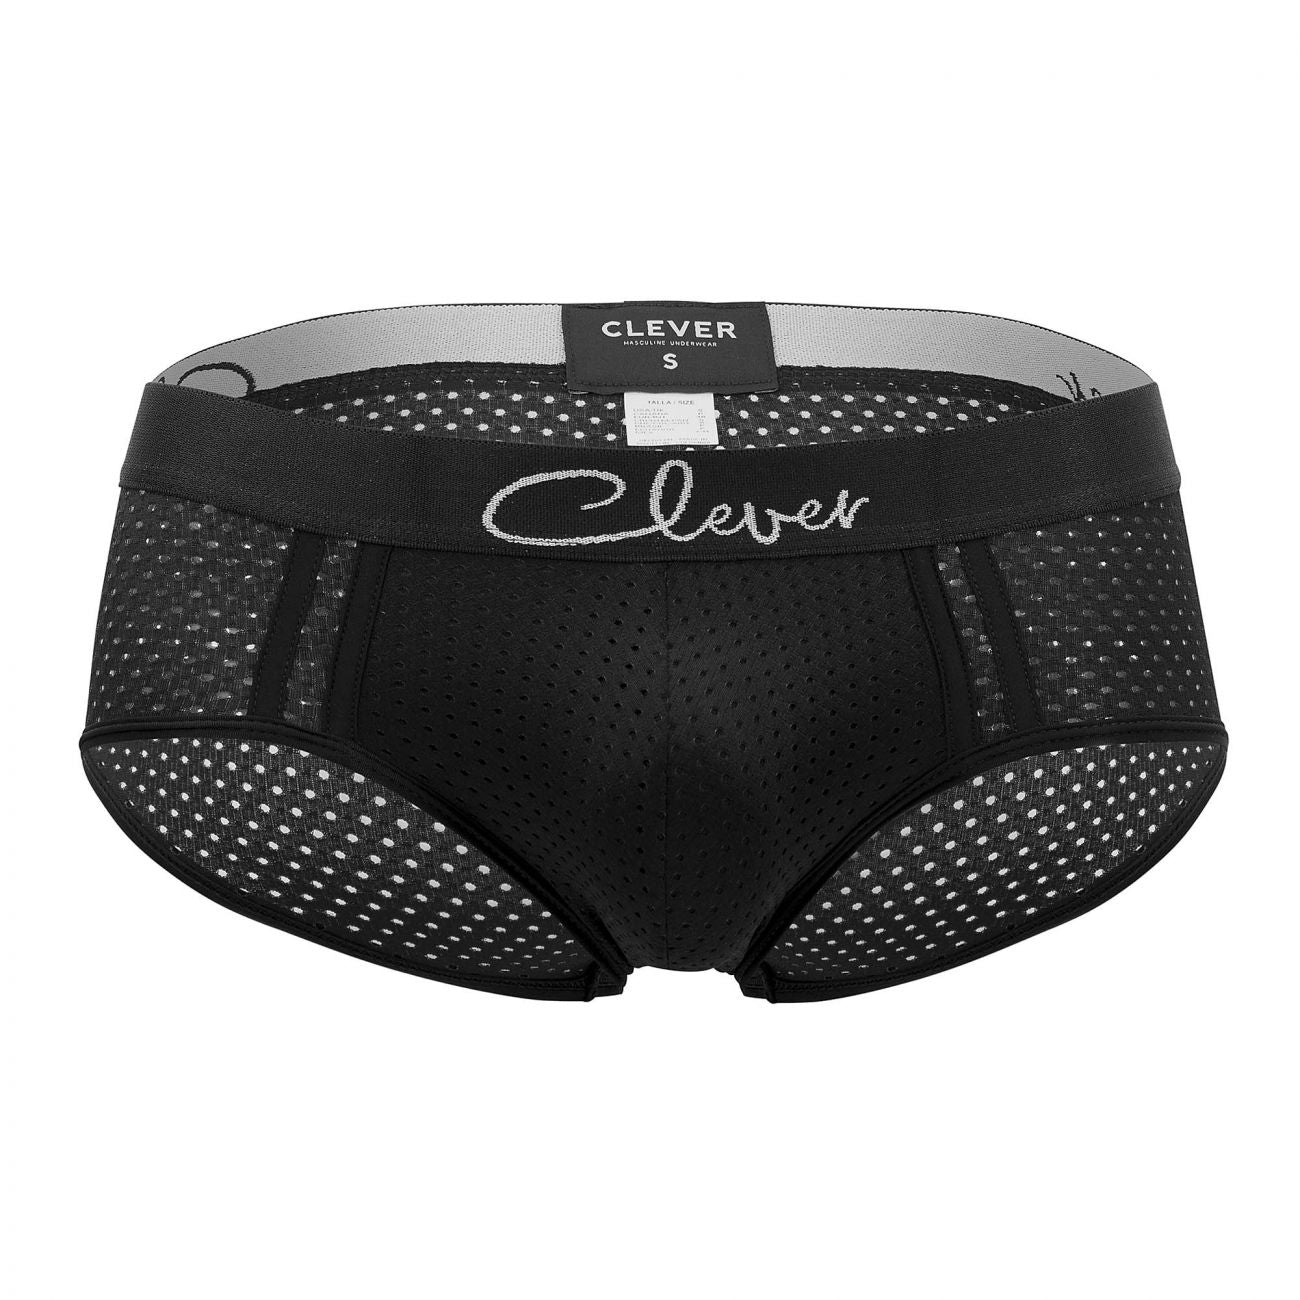 Clever 0367 Time Briefs Black